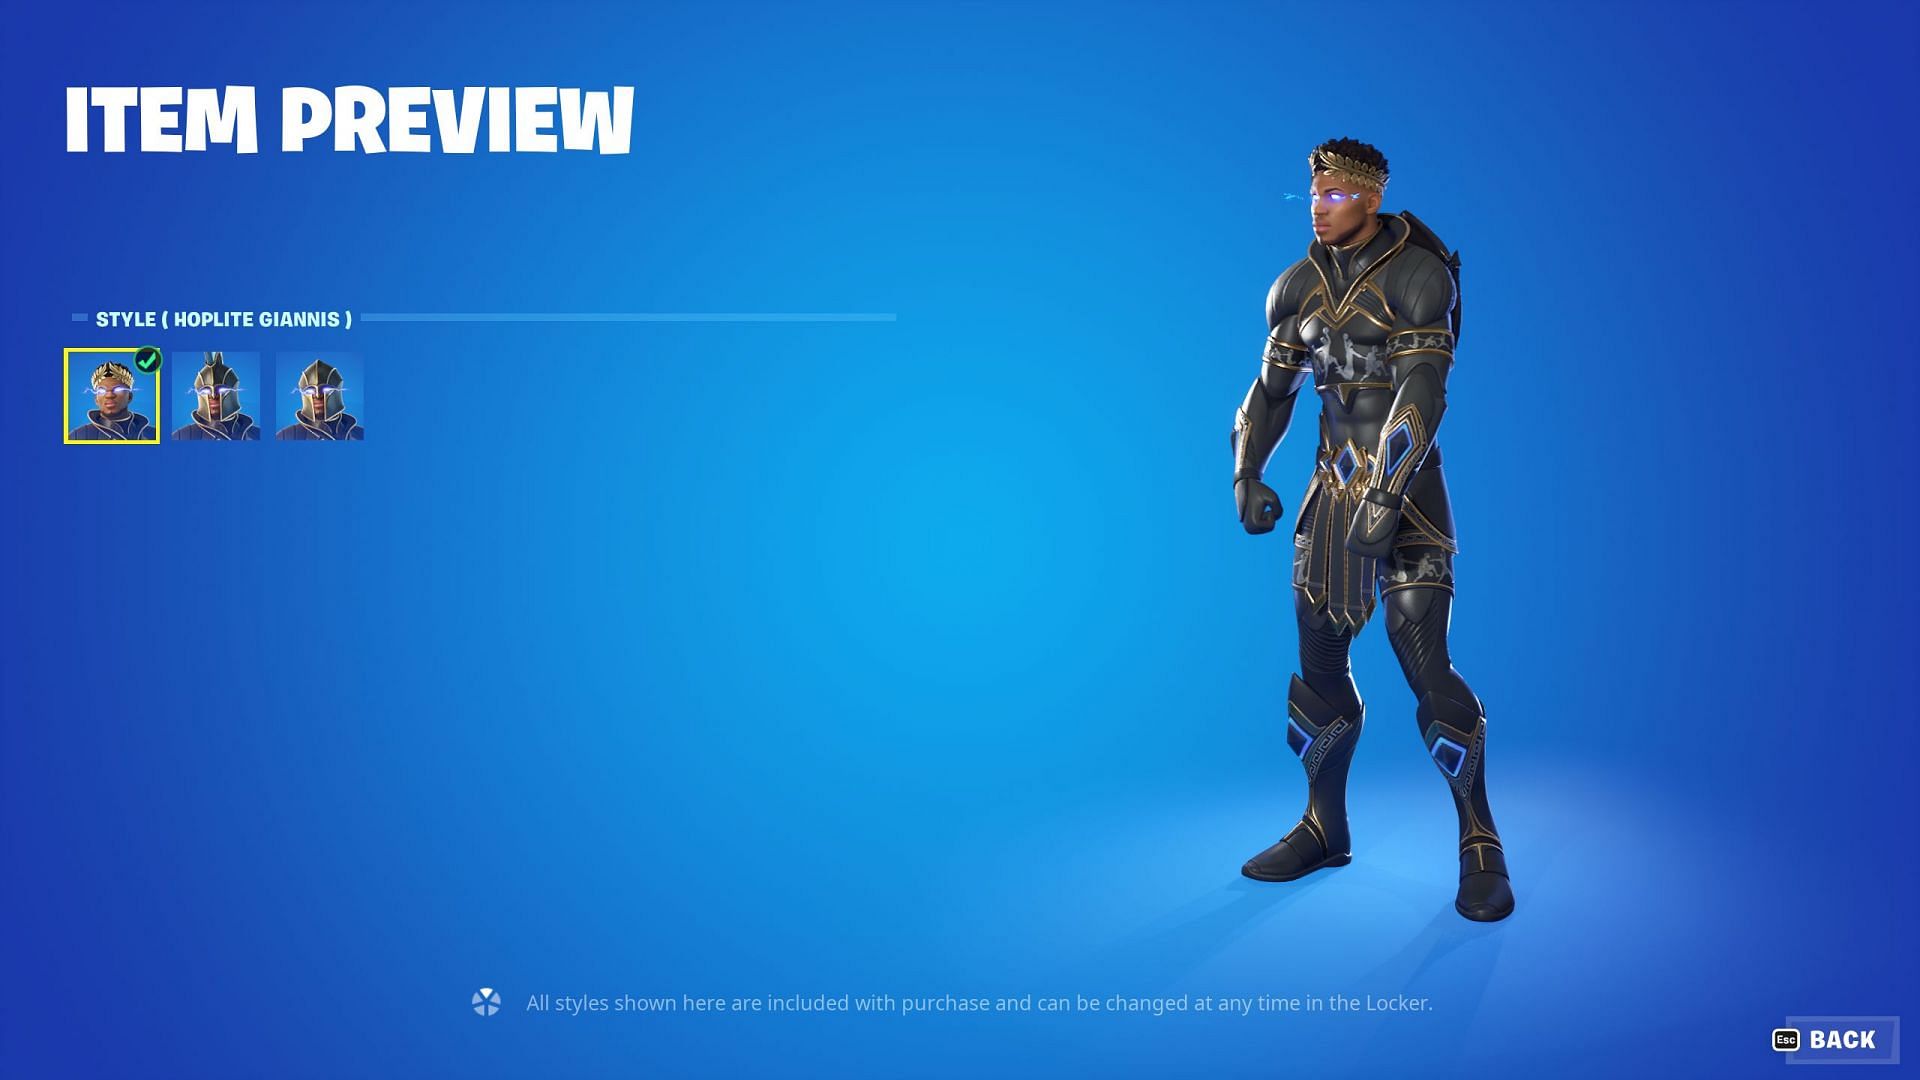 To obtain the skin, you simply need to hold down the Purchase button (Image via Epic Games)